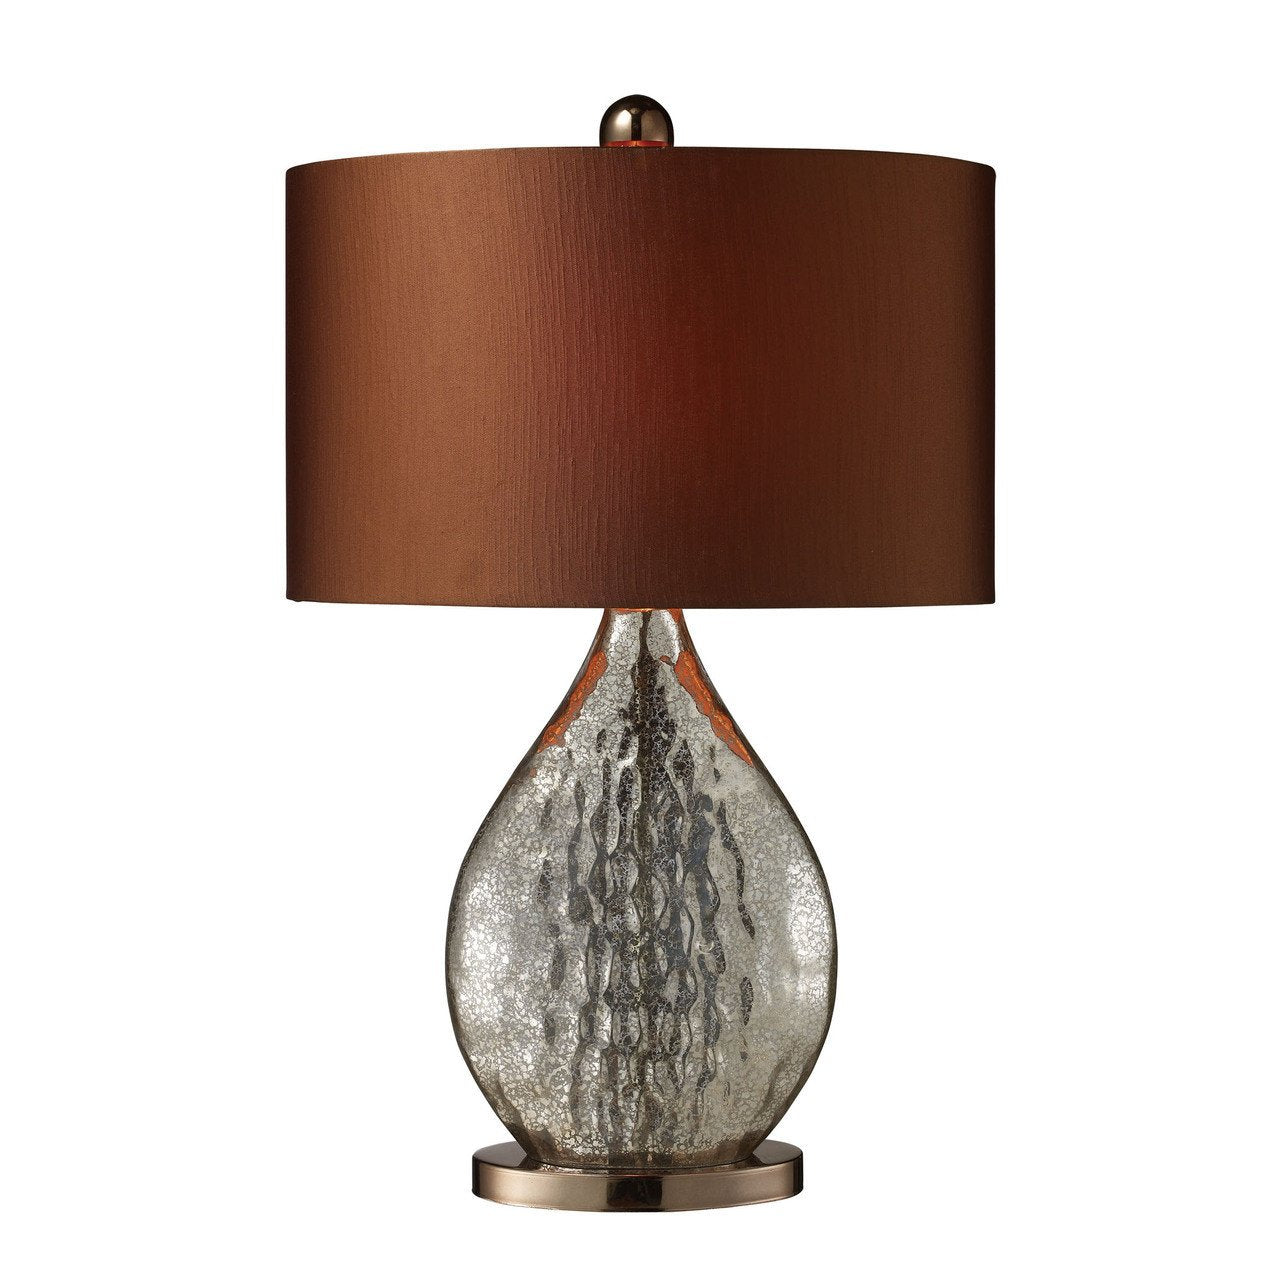 Dimond New Product  Sovereign Table Lamp In Antique Mercury And Coffee Plating D1889 Sold by VaasuHomes